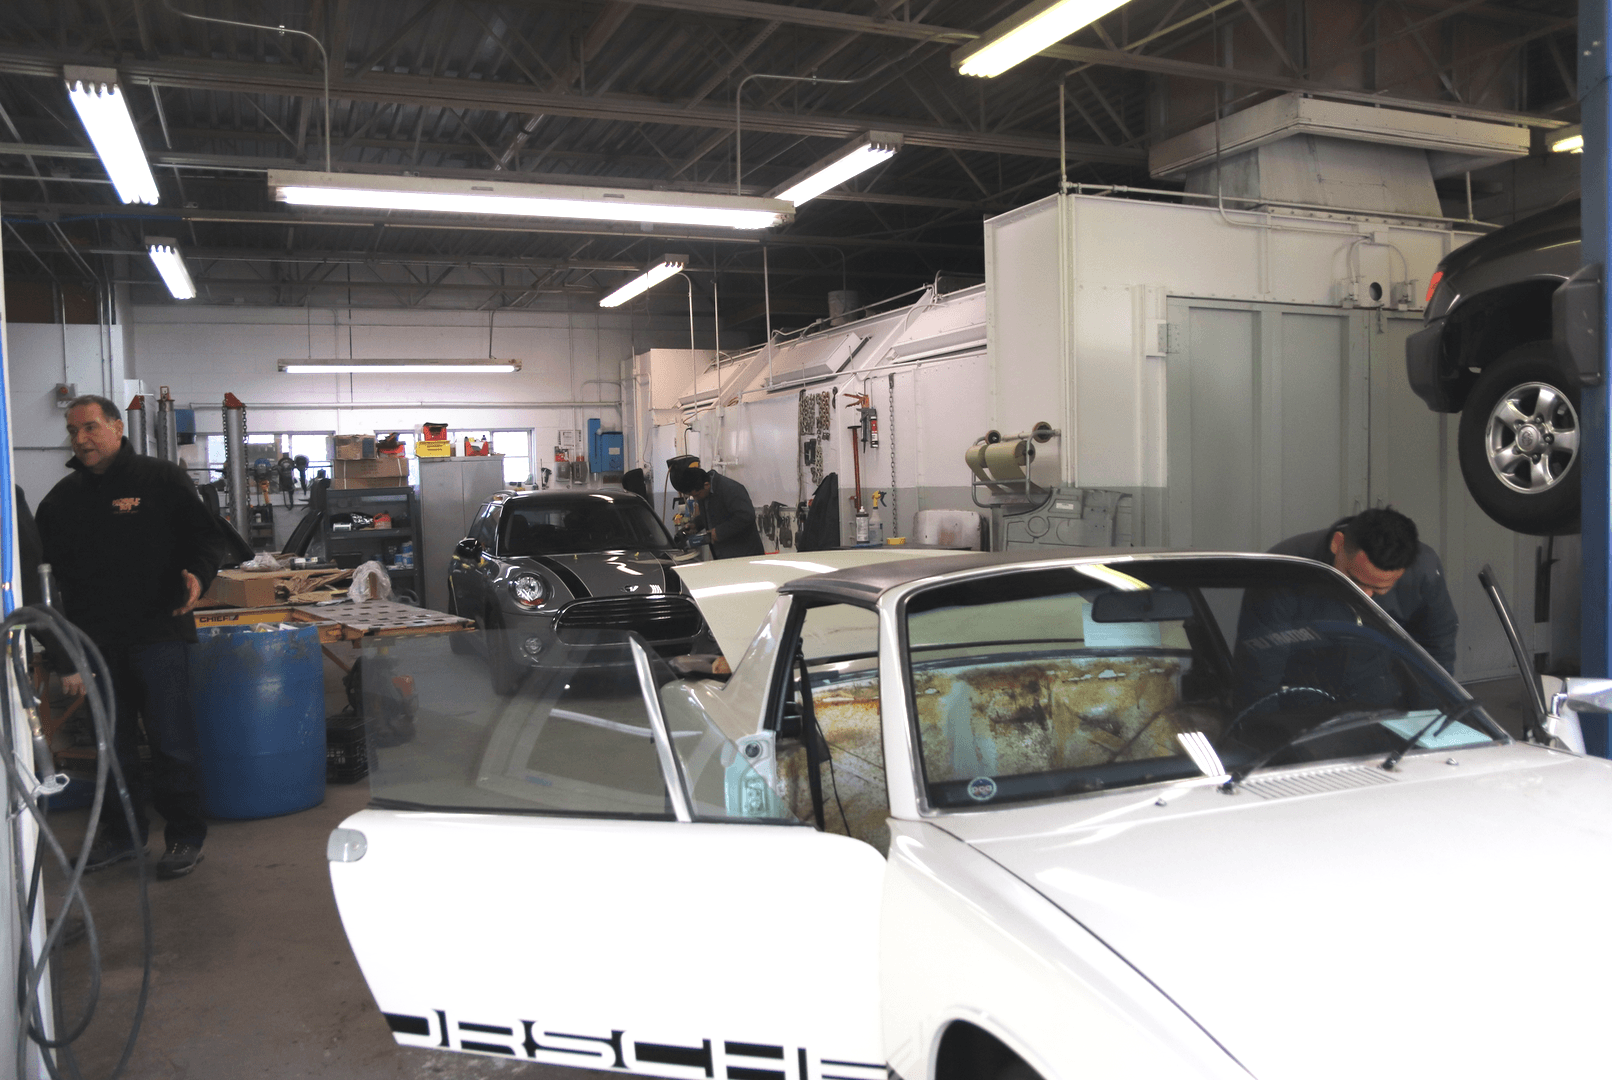 Inside the new brick-and-mortar location for Mobile Auto Body 101. Jan 21, 2020 Photo: Leslie Yager